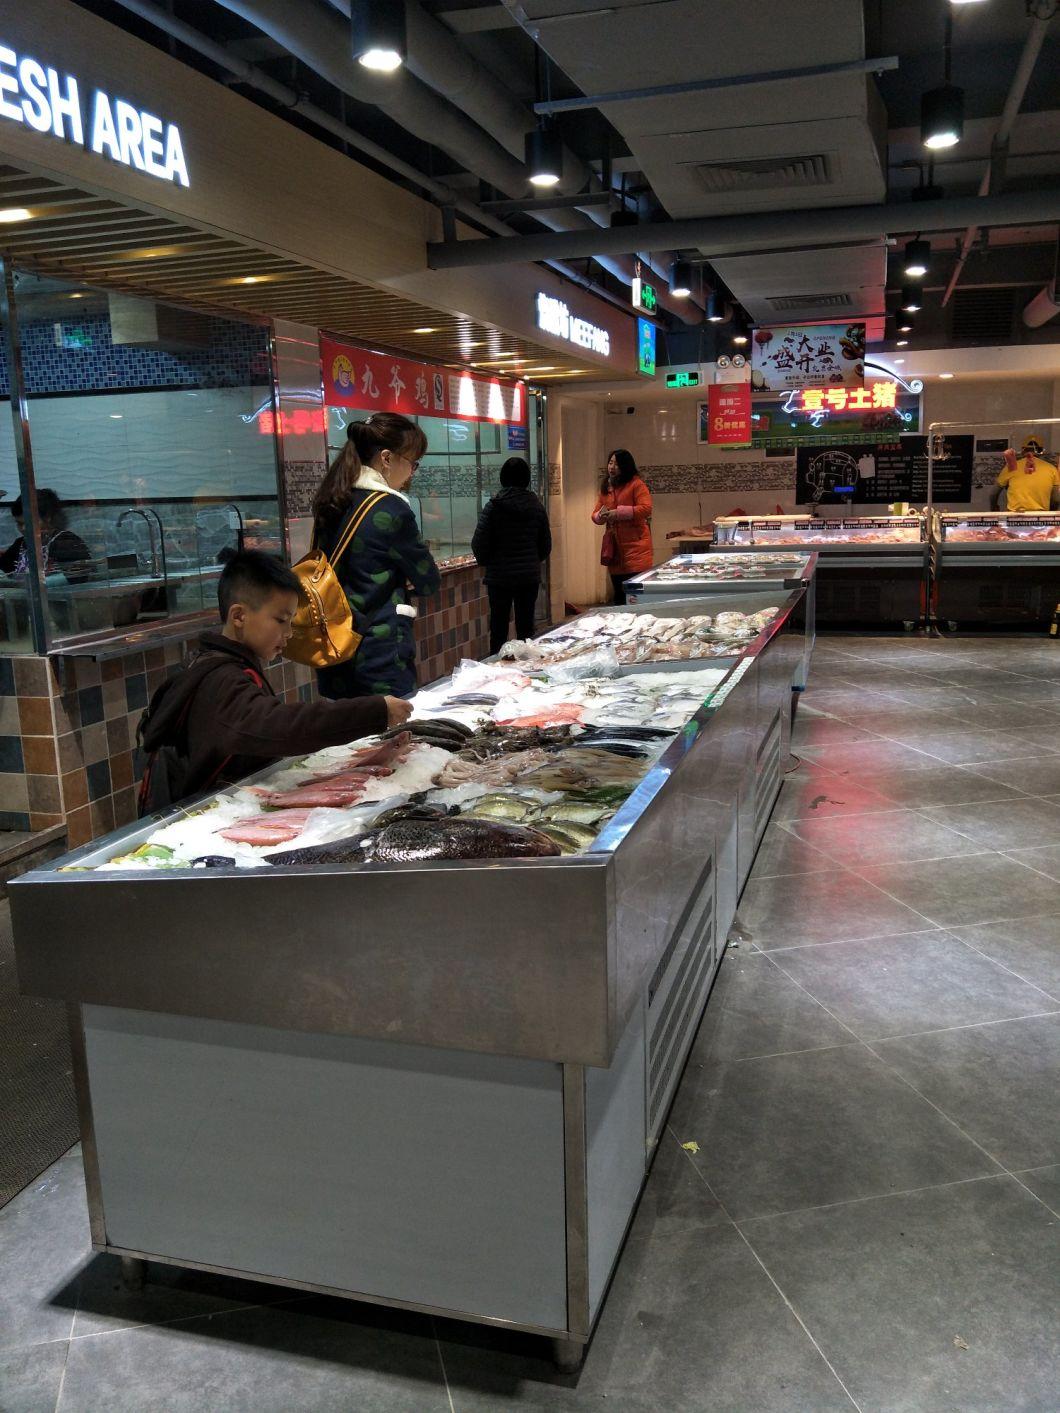 Green&Health Commercial Top Ice Refrigerated Fish Display Counter for Seafood